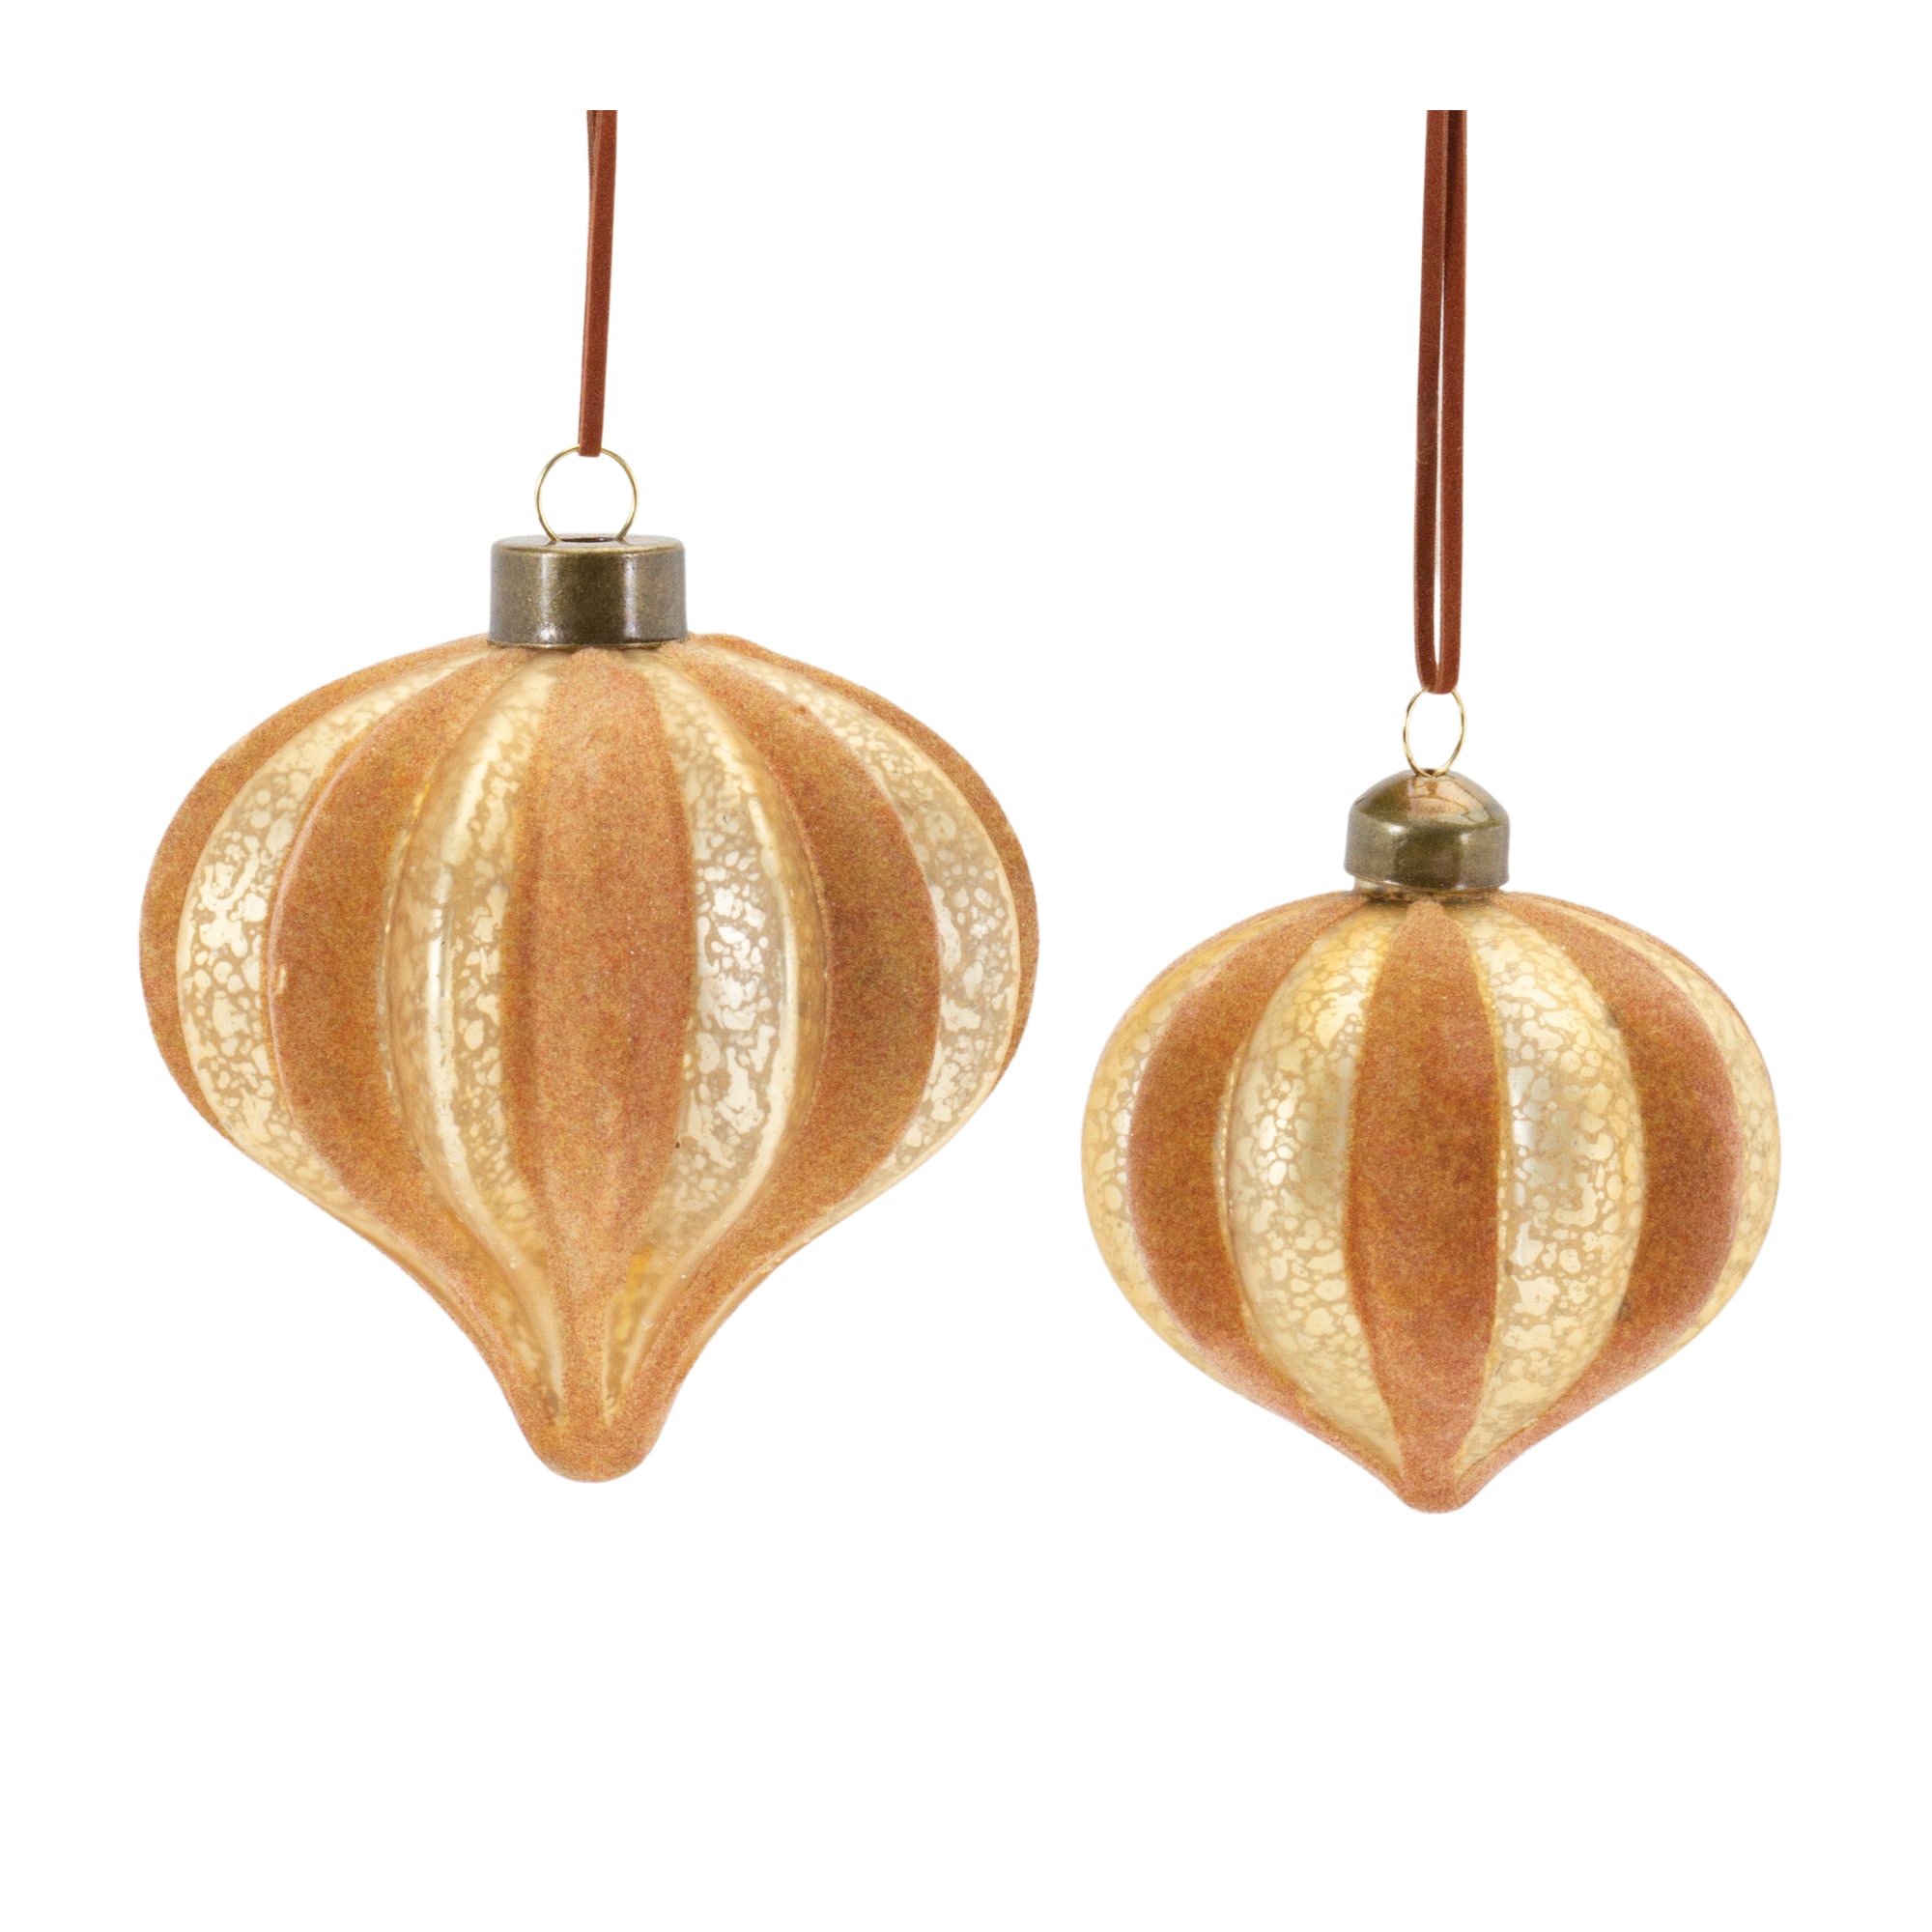 12ct. Gold Ribbed Glass Onion Ornaments